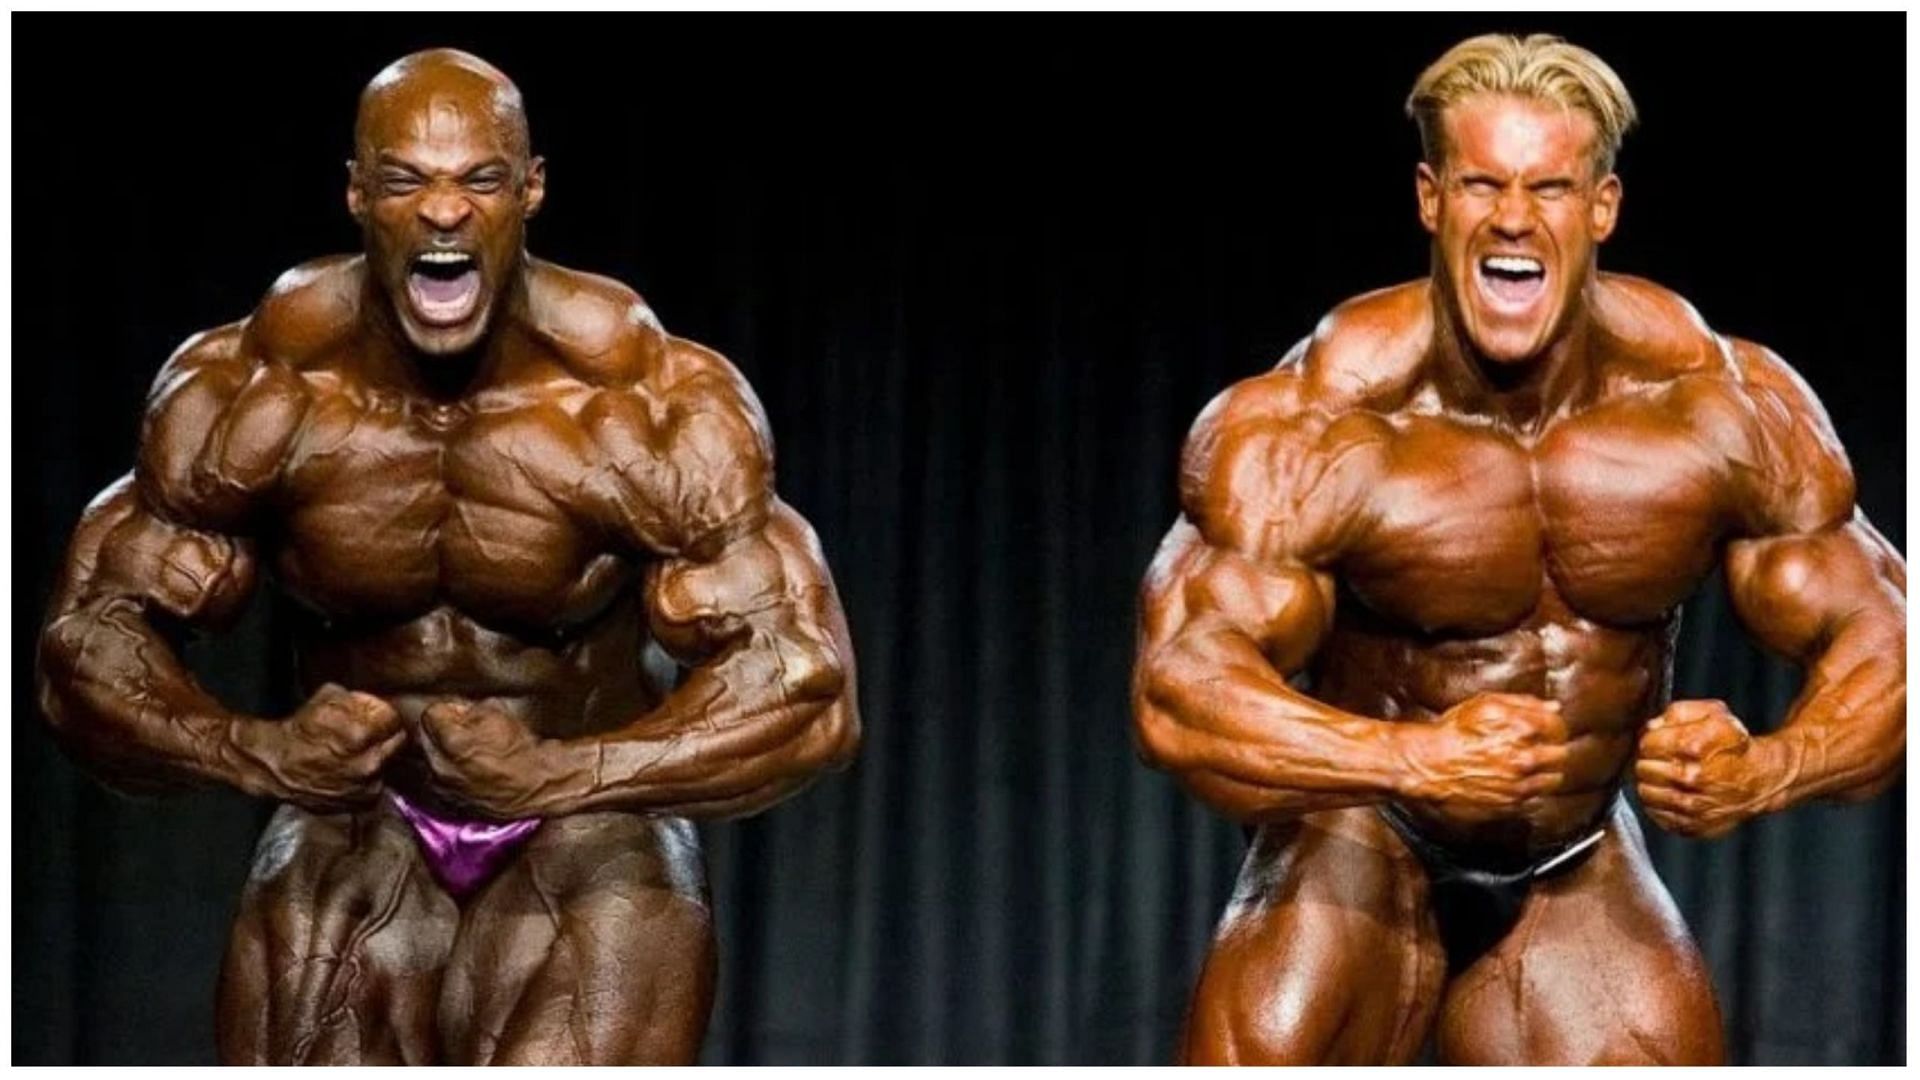 Ronnie Coleman and Jay Cutler face off at the 2001 Mr. Olympia (Image via Instagram/@jaycutler)